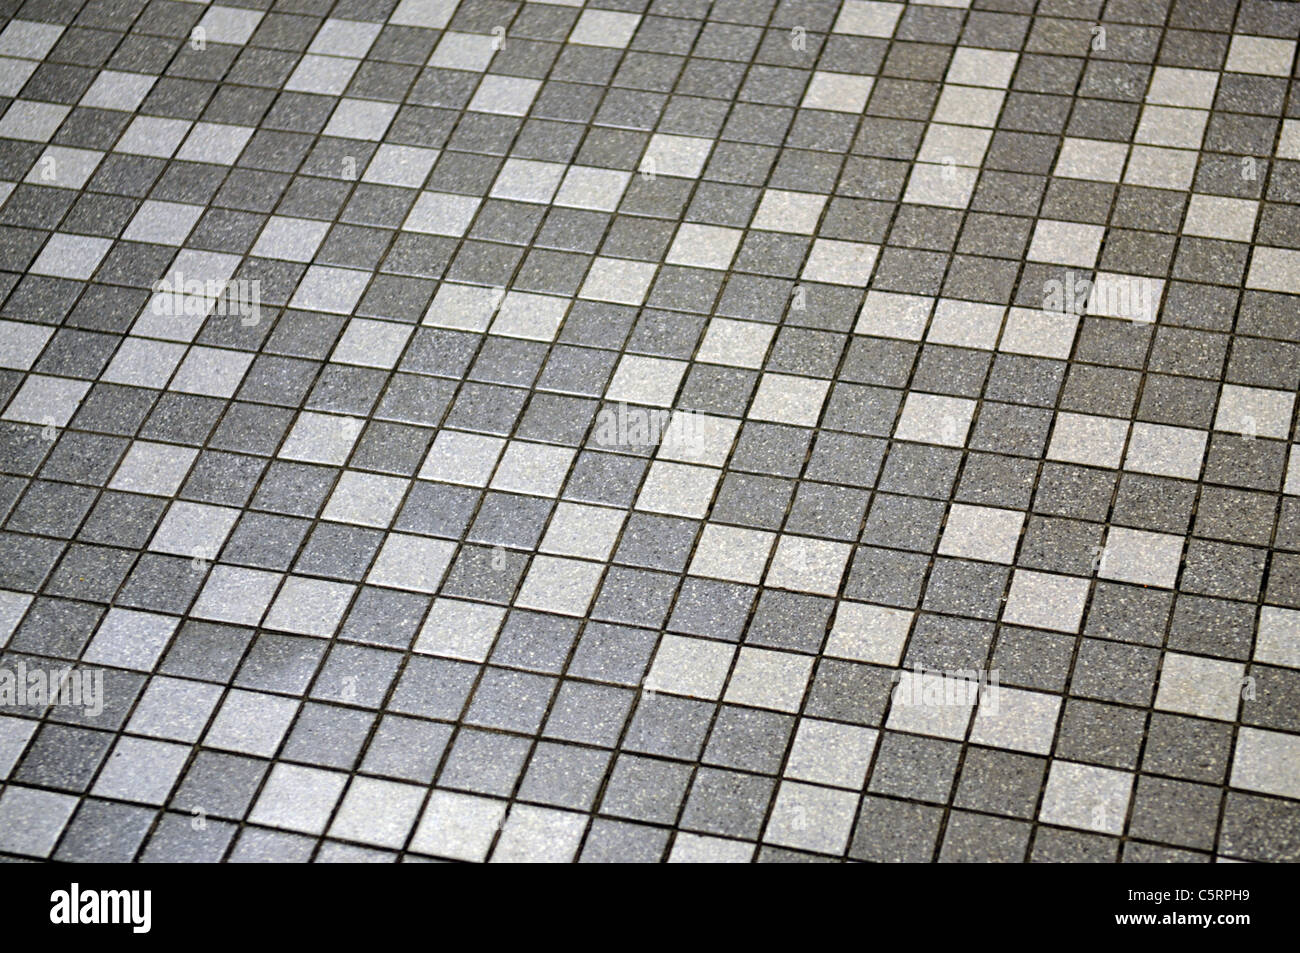 A view of a gray and white tile floor that can be used as a background or a texture. Stock Photo